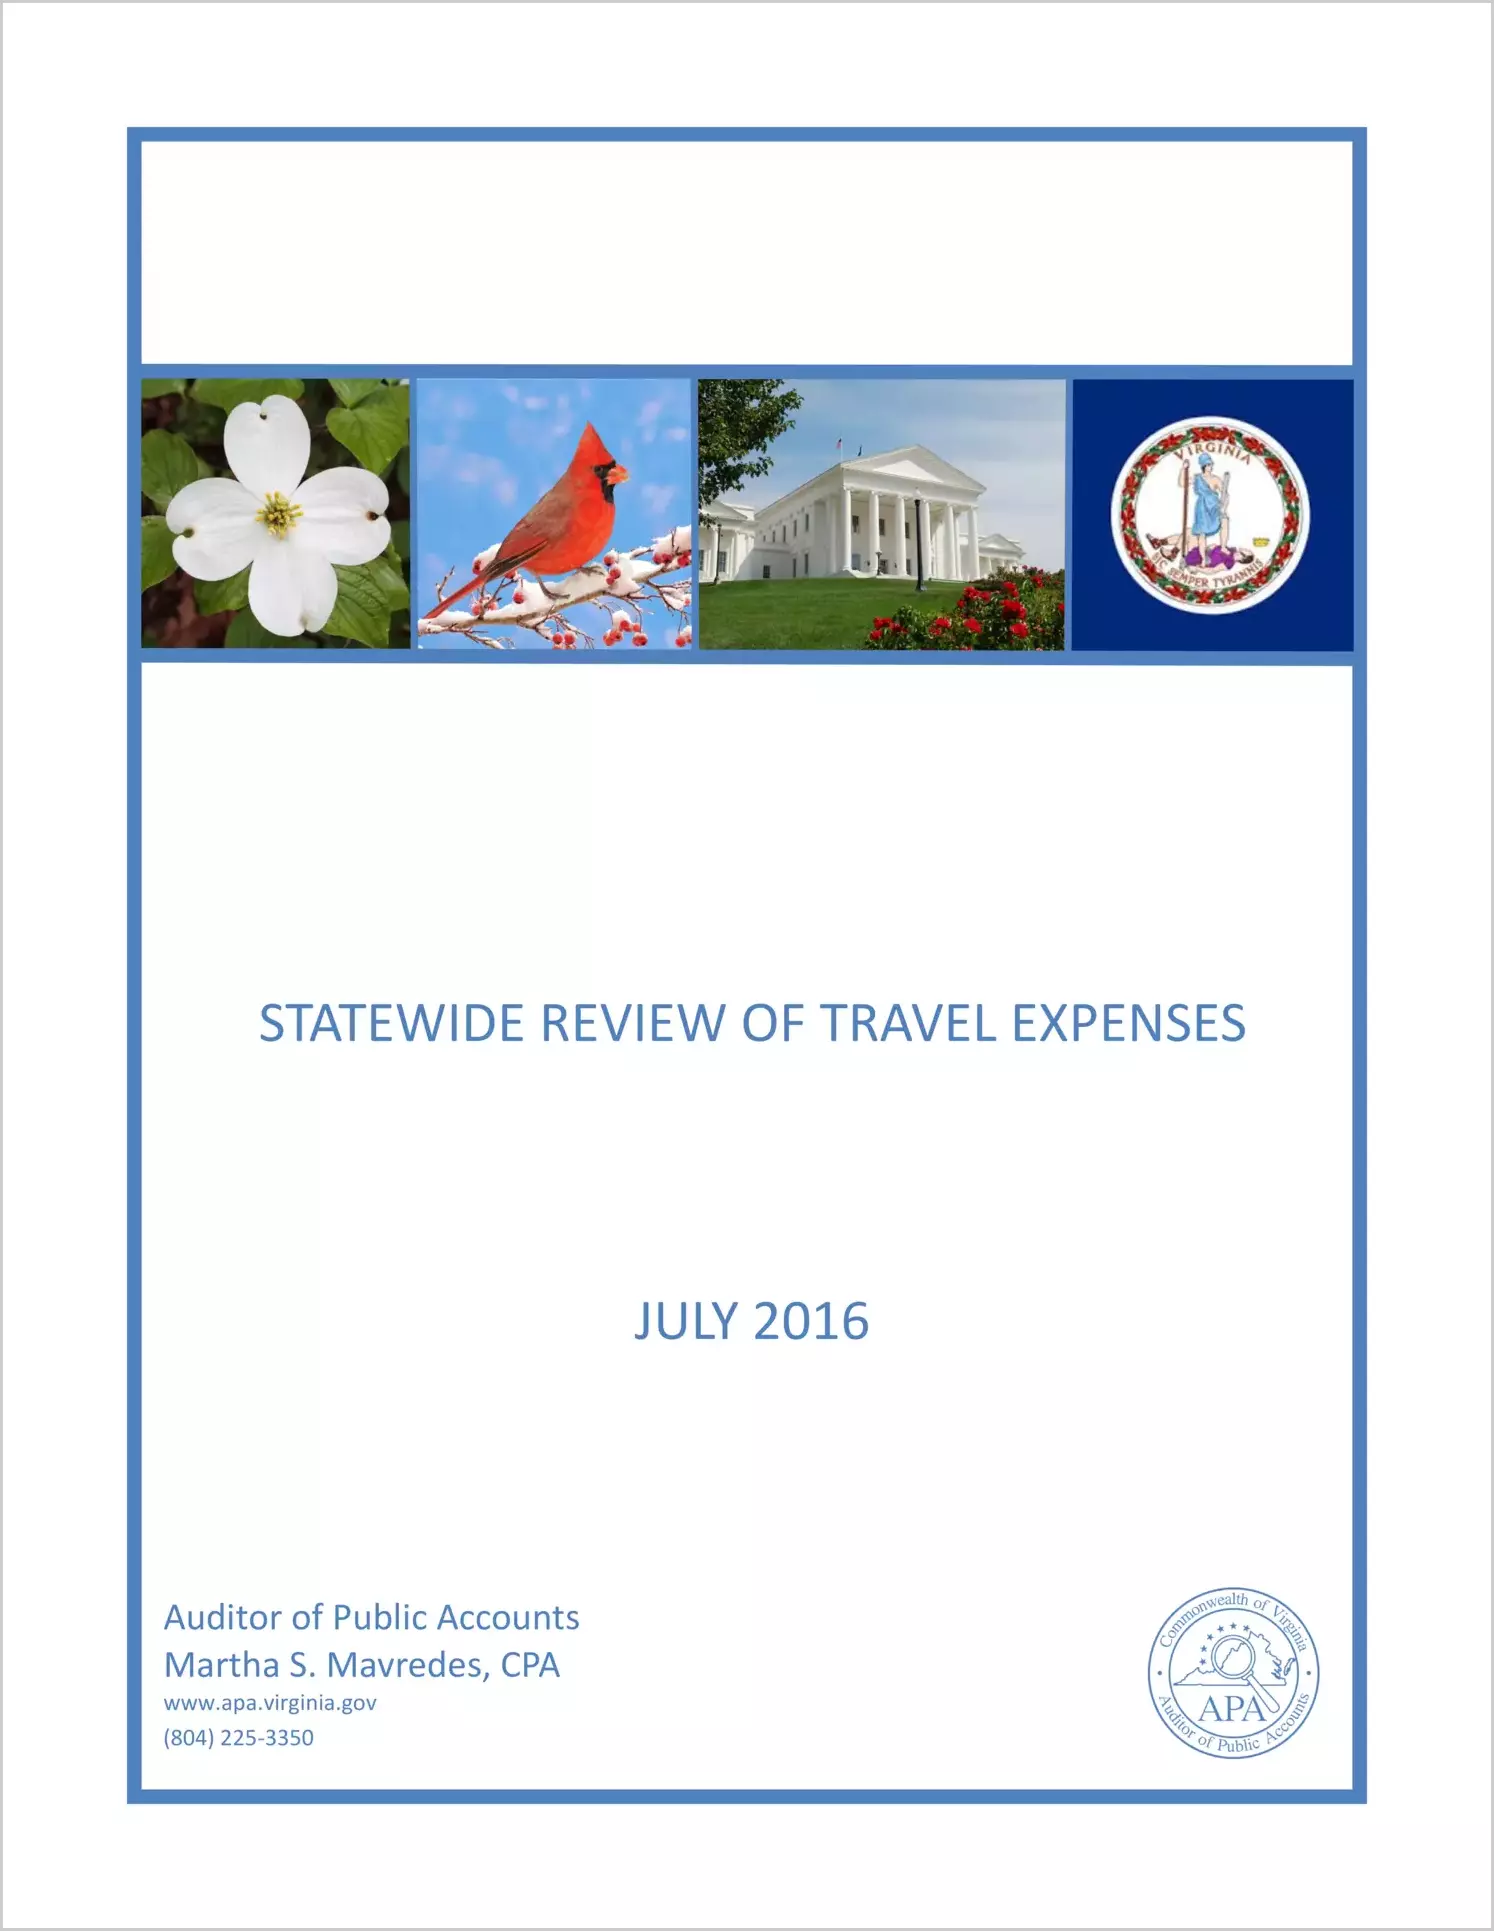 Statewide Review of Travel Expenses as of July 2016